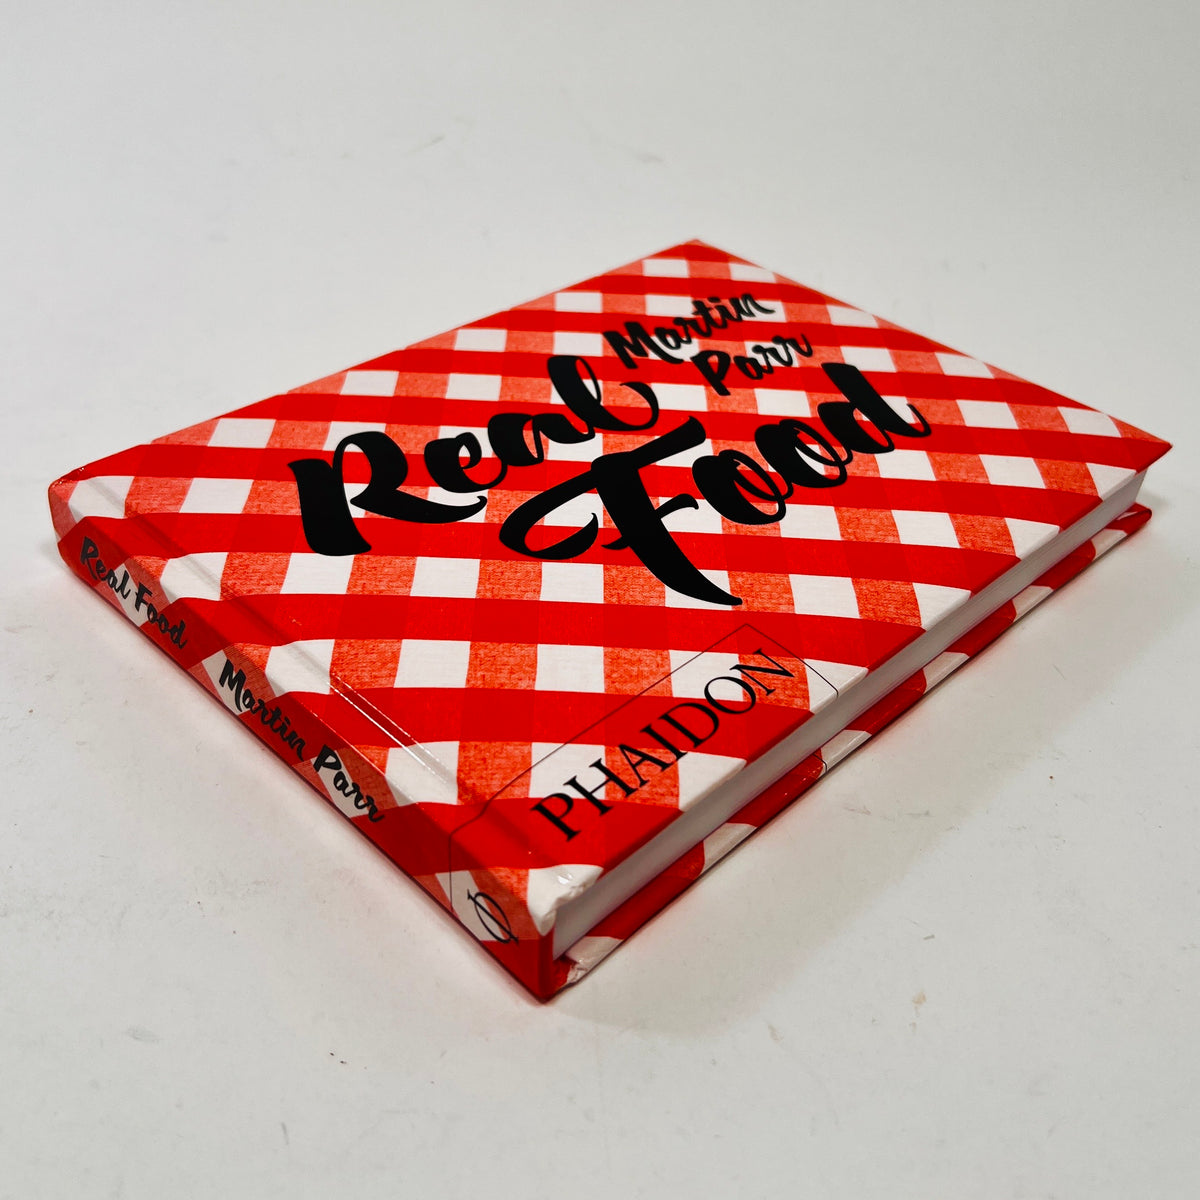 Martin Parr - Real Food (Signed Copy)